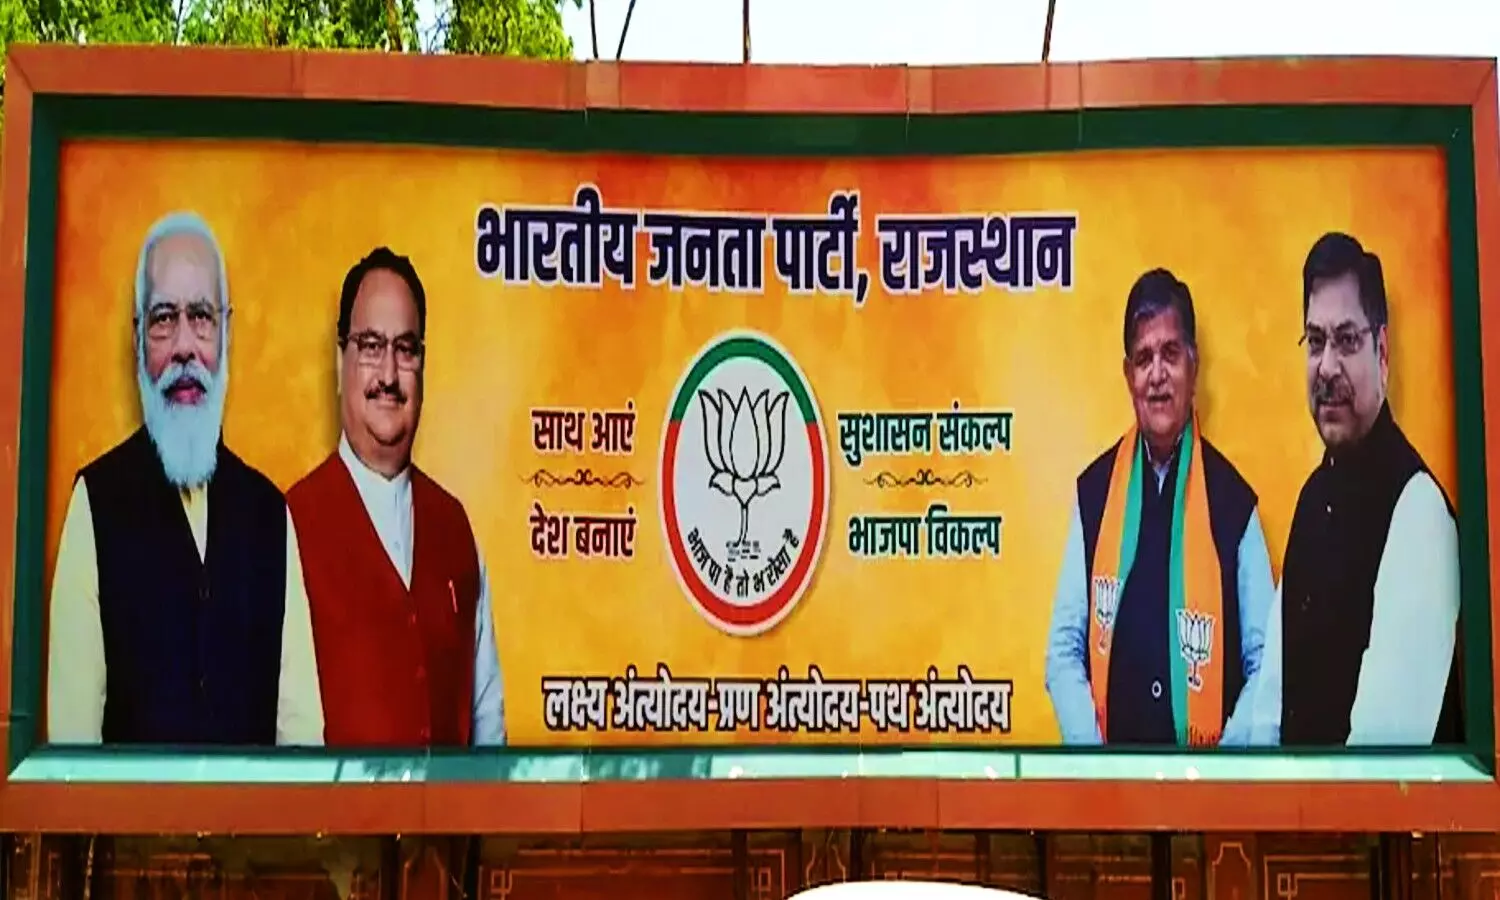 former Chief Minister and BJP veteran Vasundhara Raje is nowhere in the new poster of the BJP party in Rajasthan.